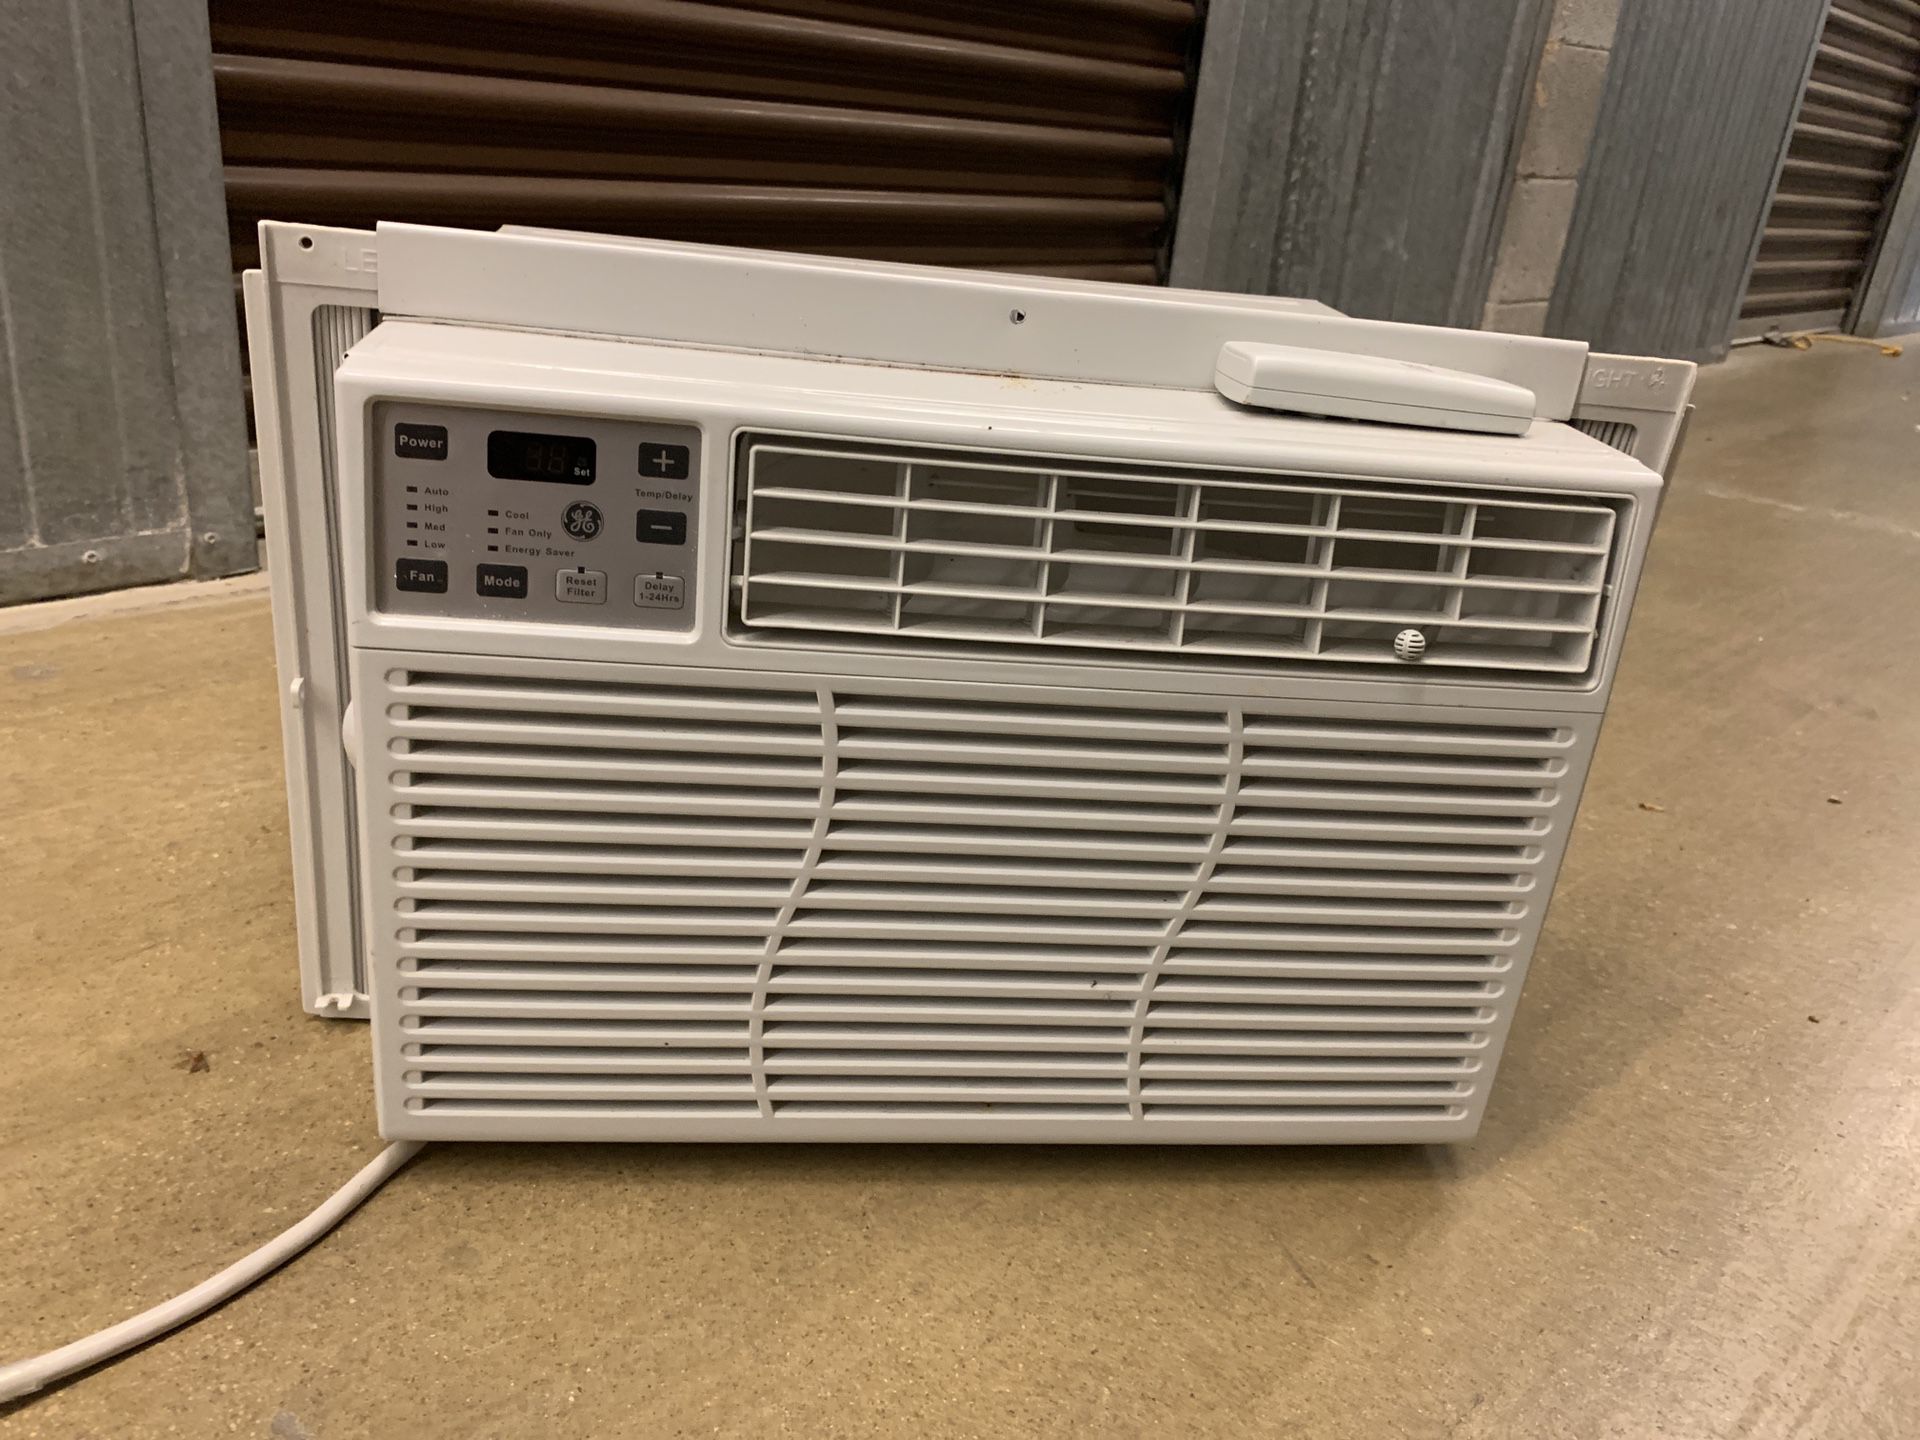 Barely used Air conditioner